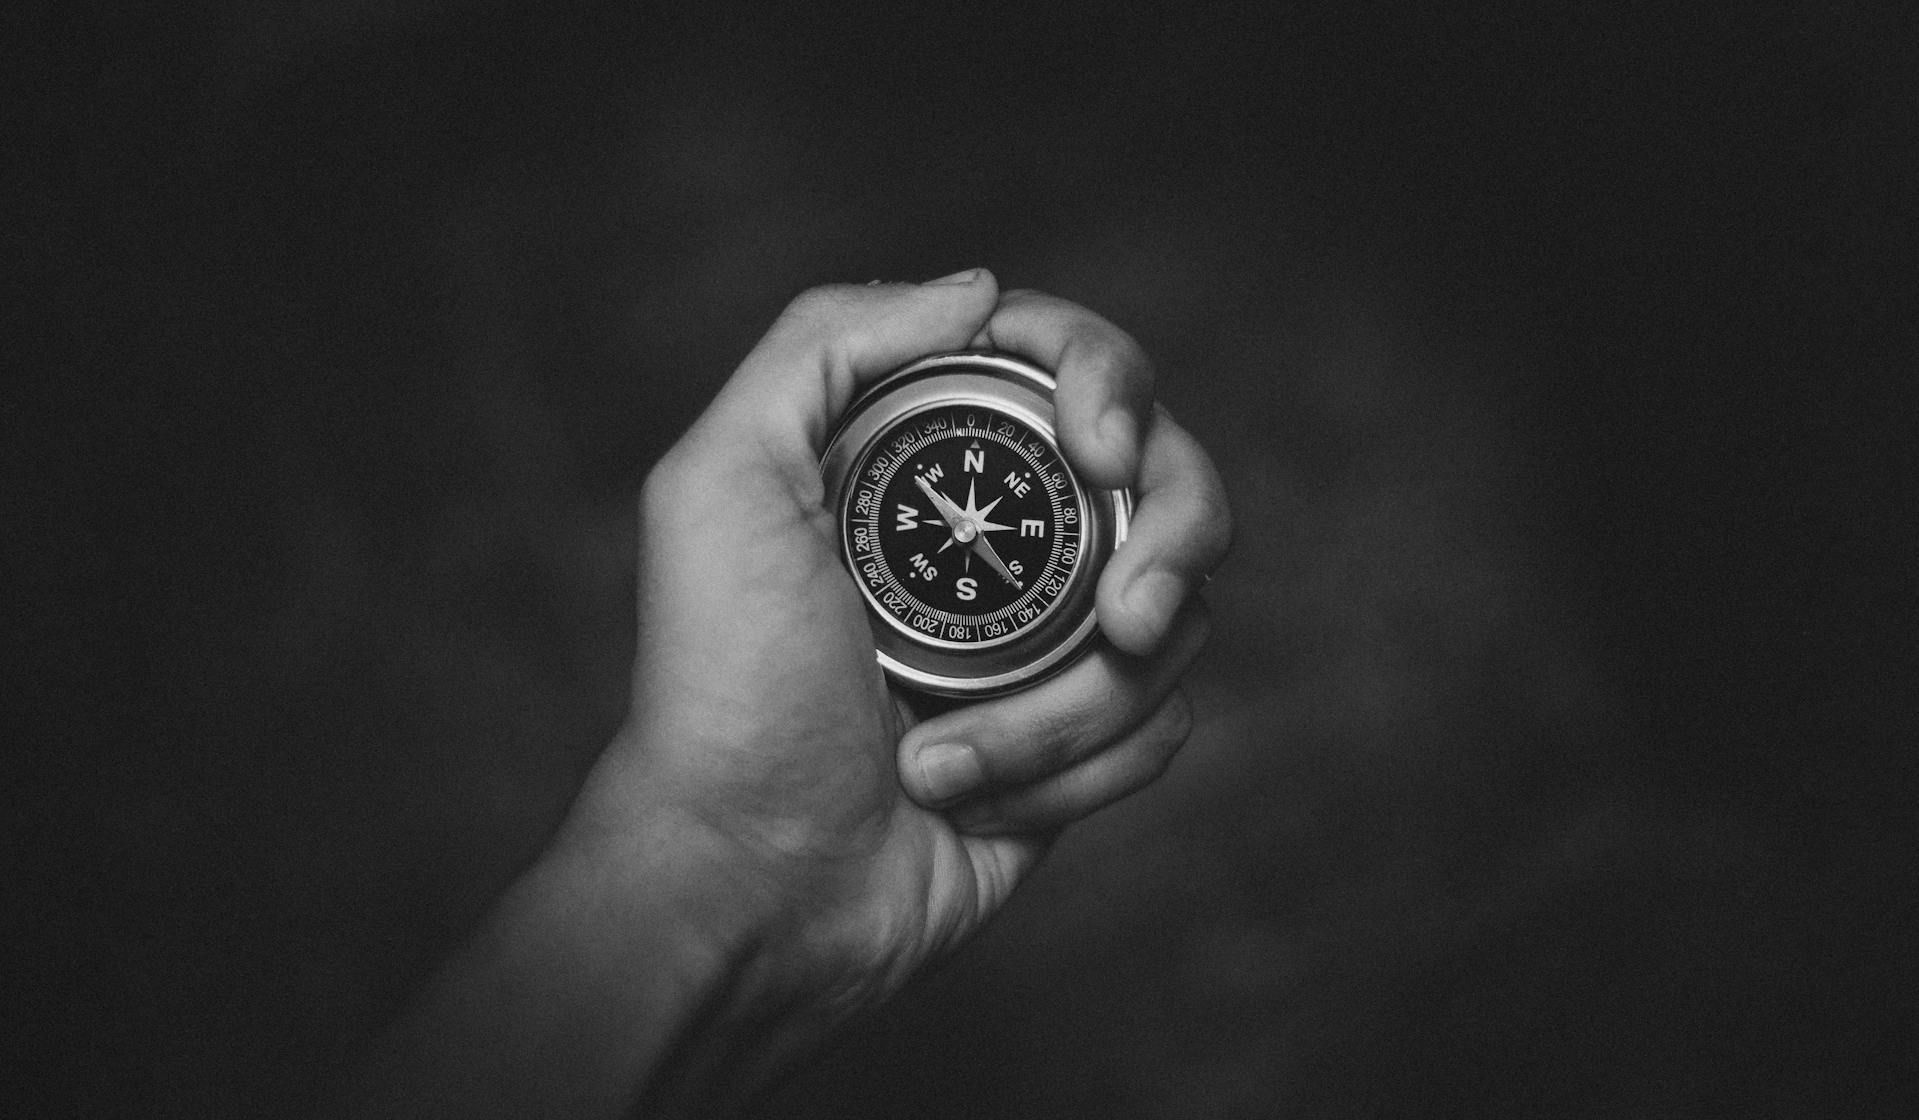 A person holding a round analog compass | Source: Pexels